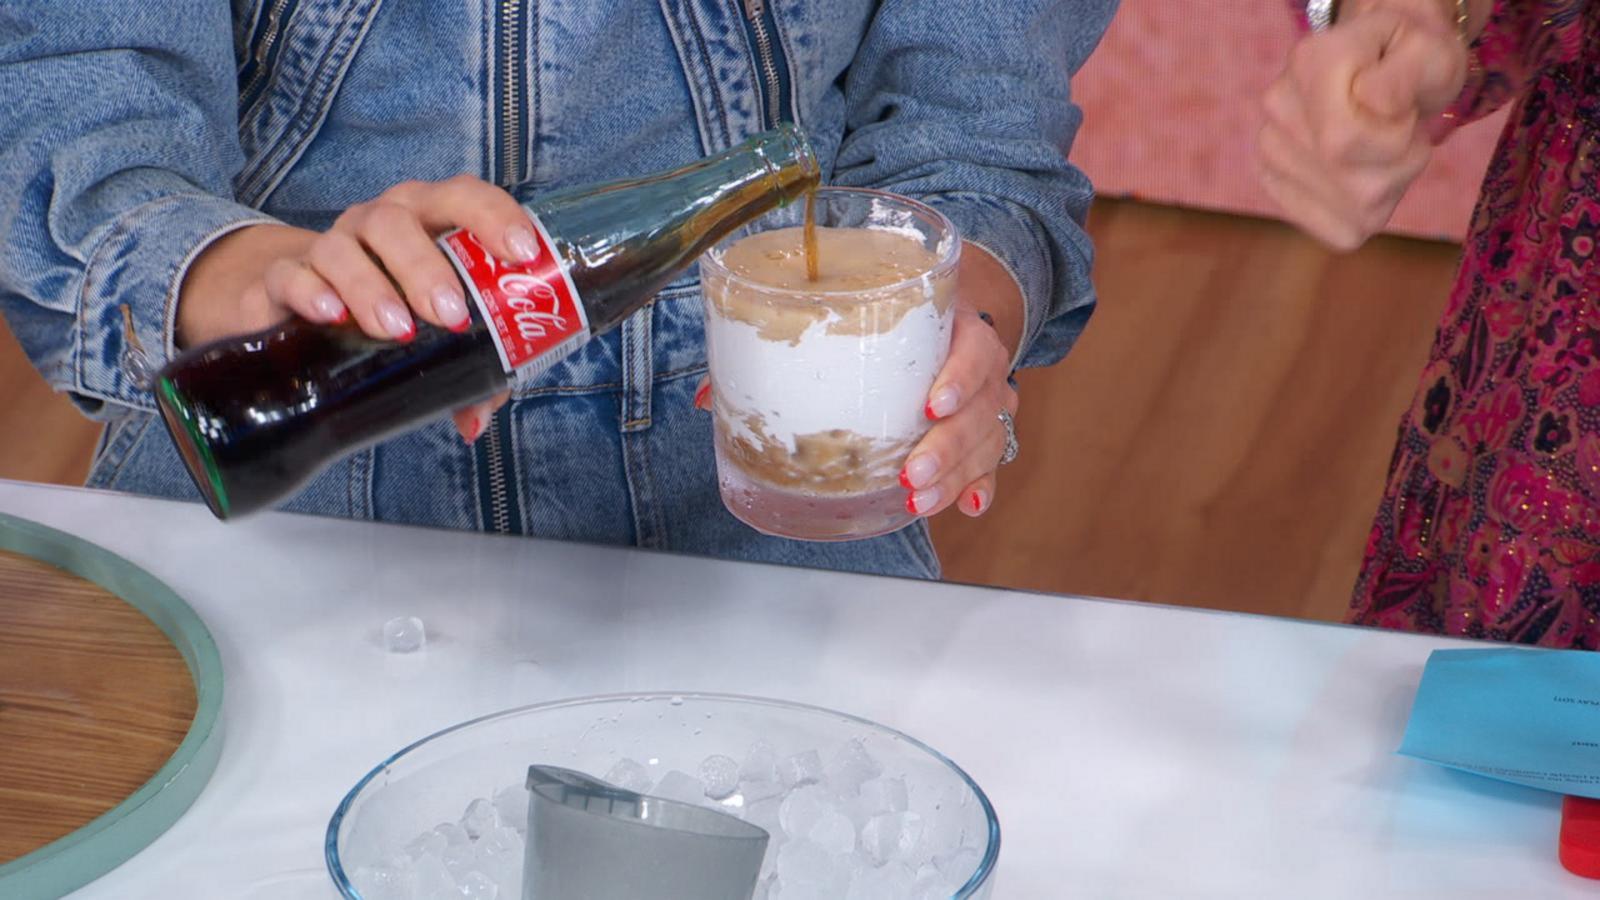 What to know about 'Fluffy Coke'